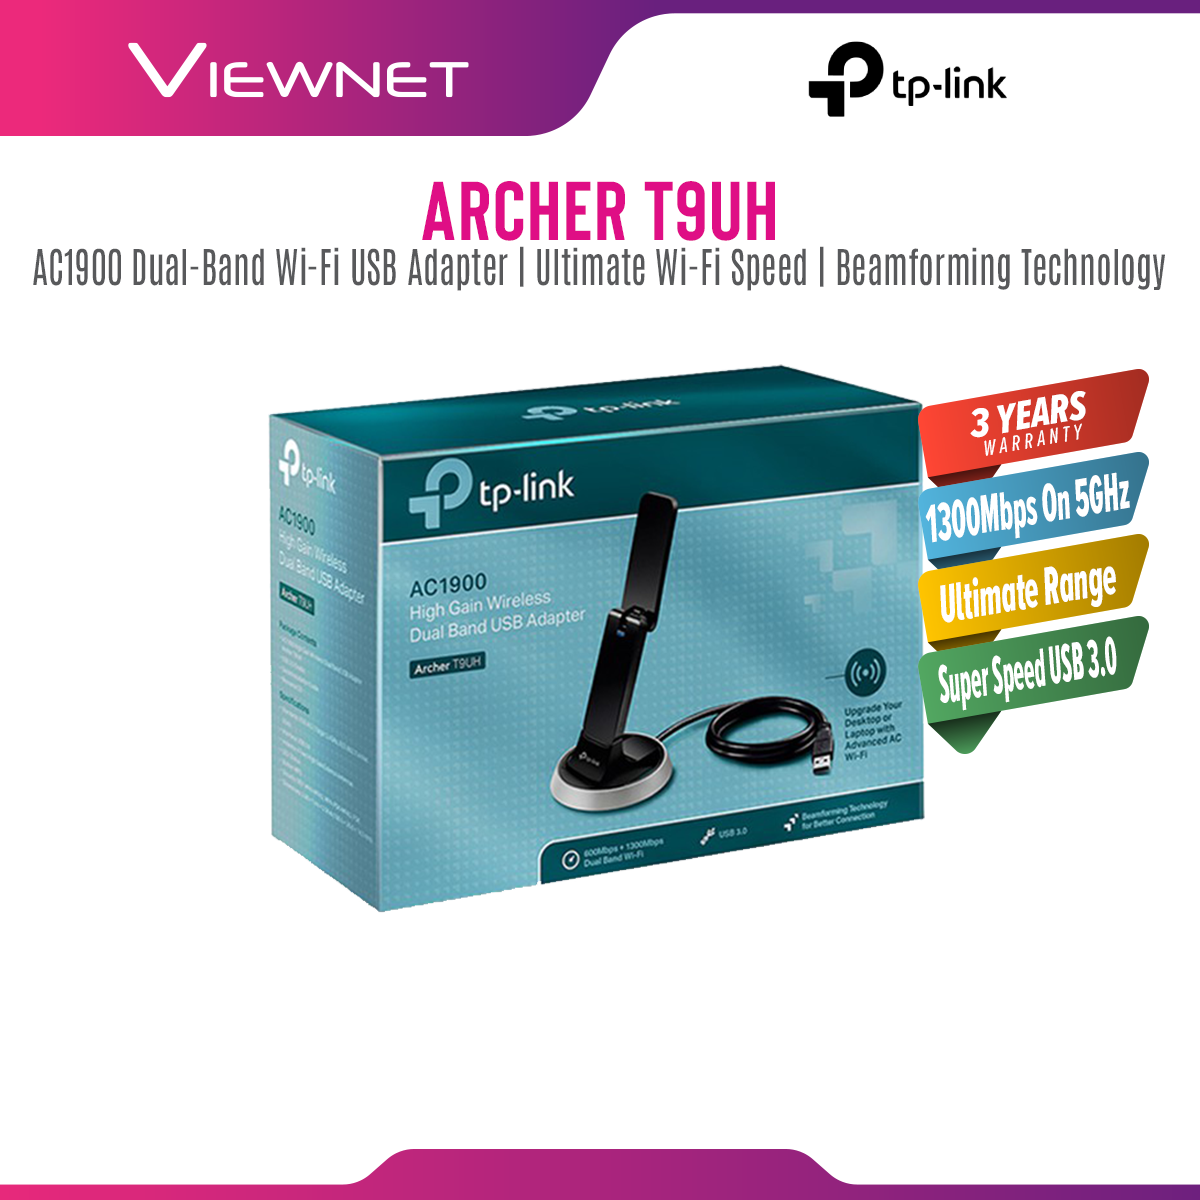 TP-Link Archer T9UH AC1900 Wireless High Gain Dual Band USB Adapter